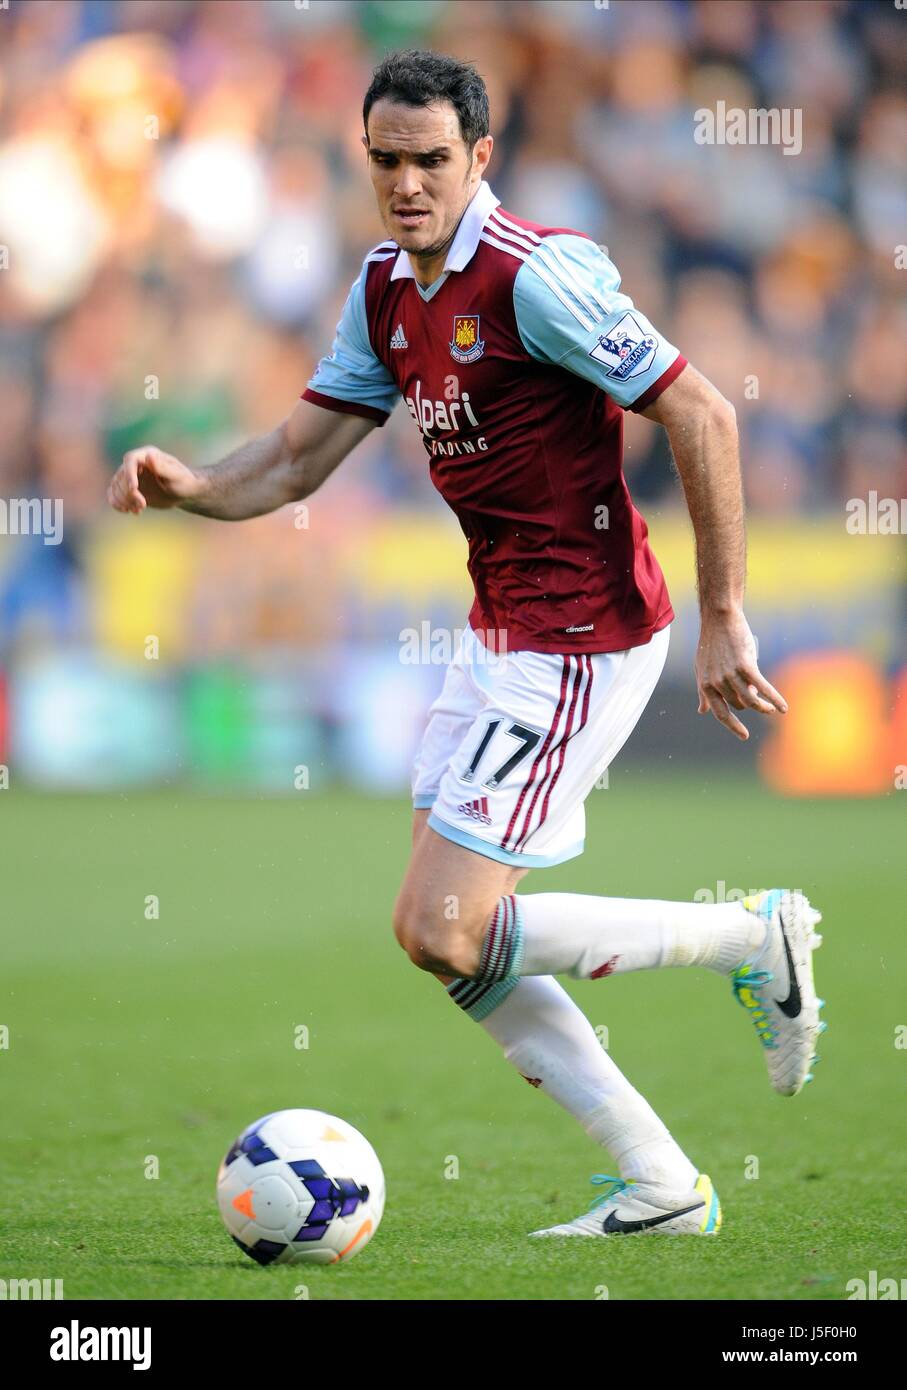 JOEY O'BRIEN West Ham United FC Stade KC HULL ANGLETERRE 28 Septembre 2013 Banque D'Images